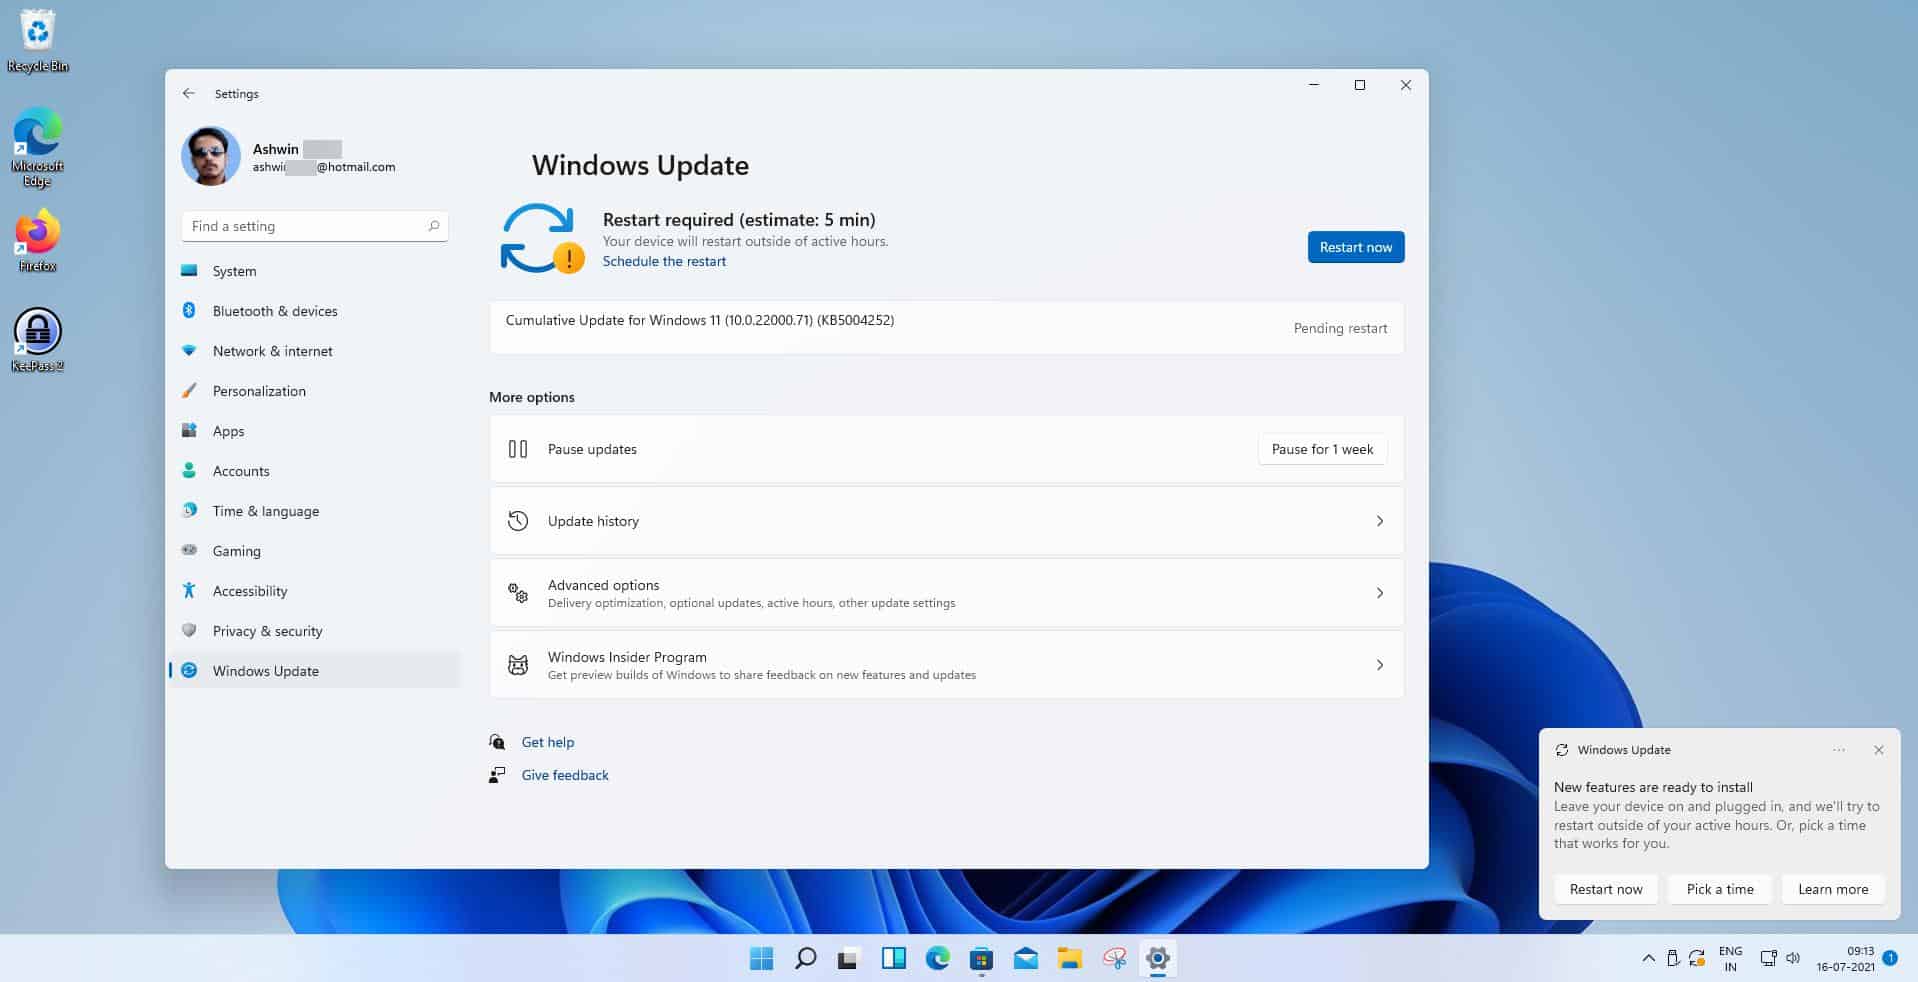 Windows 11 Insider Preview Build 22000.71 has been released